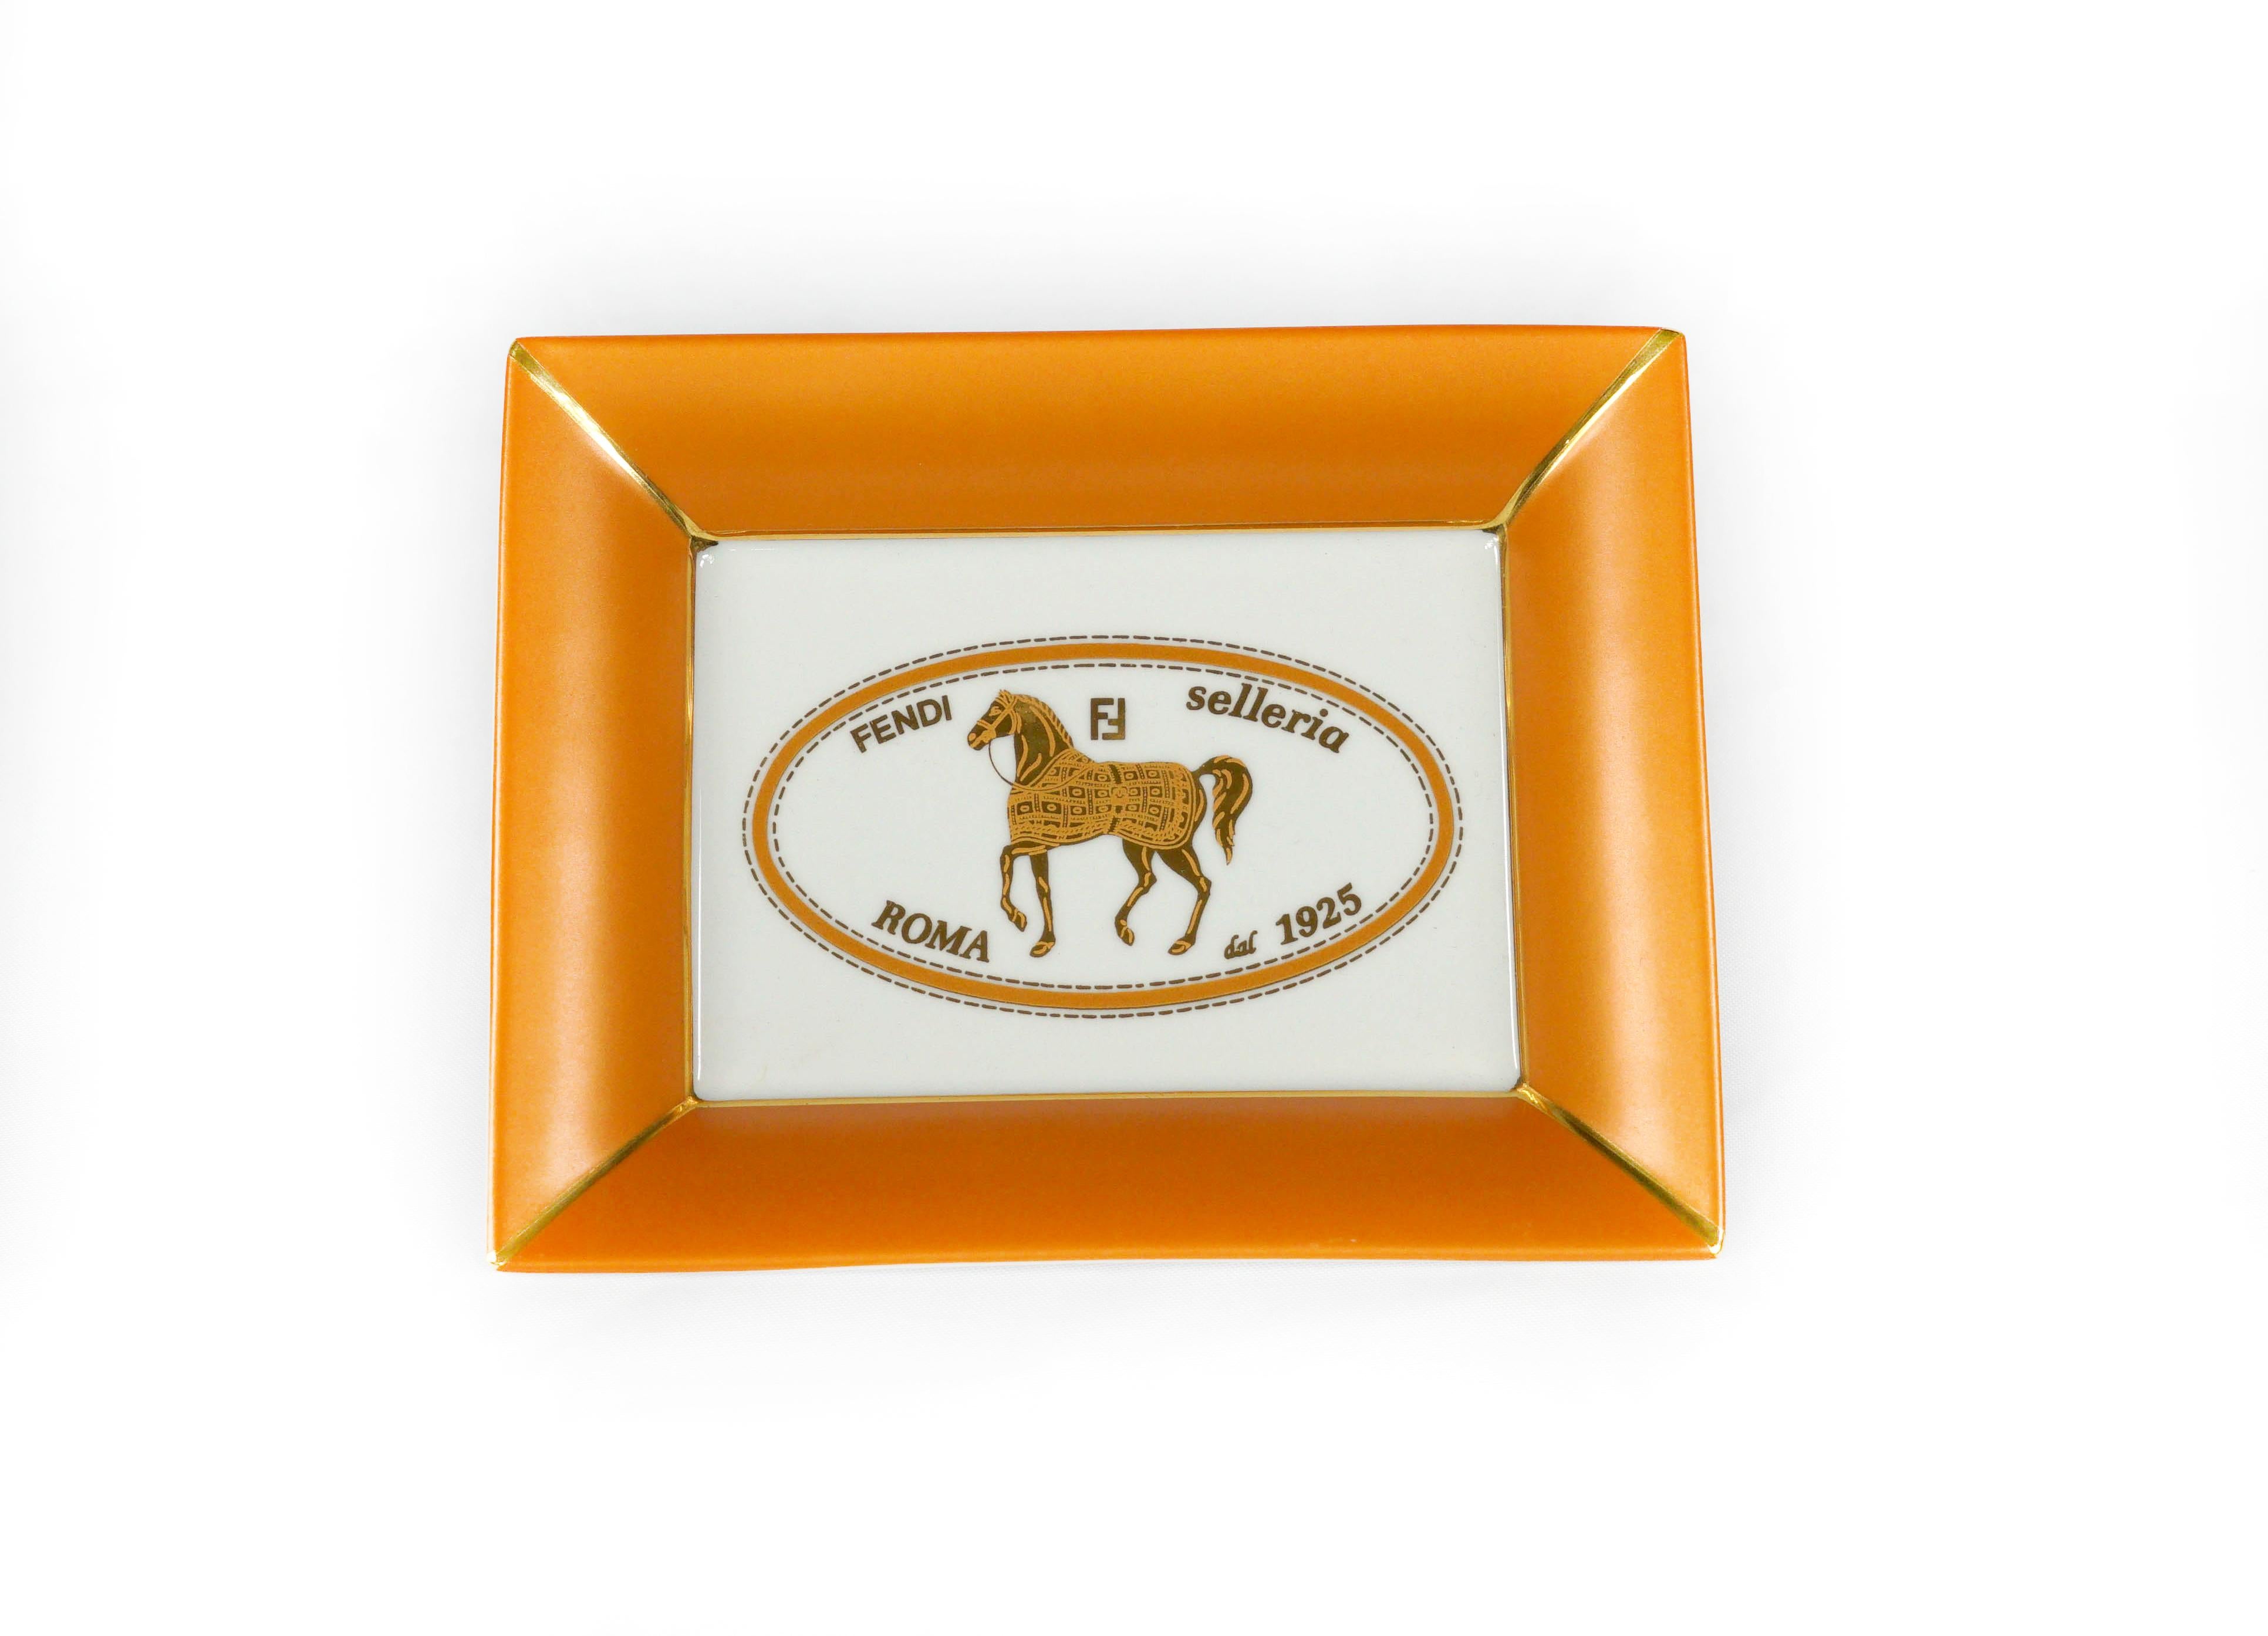 Lovely key tray made from Limoges porcelain with hand painted traditional Fendi Villa Borghese horse design. Copper with gold details.
 